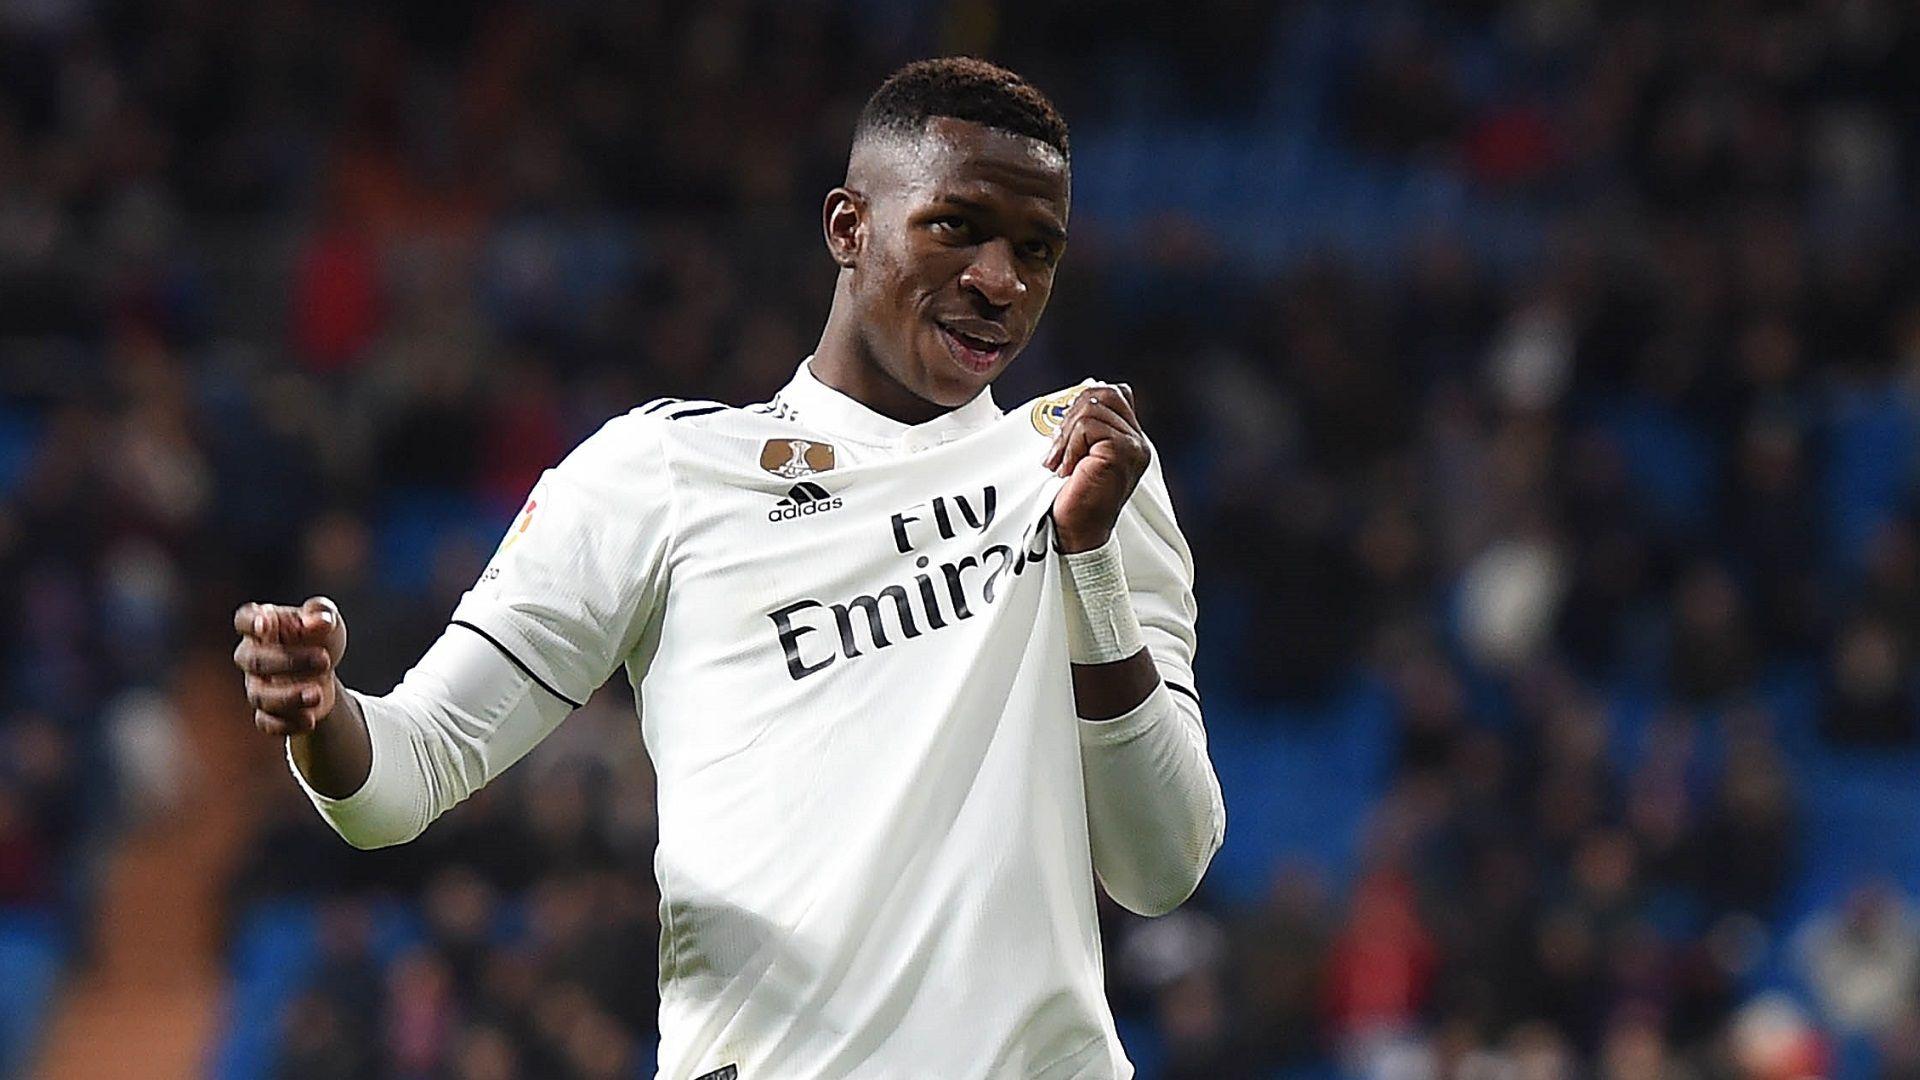 Vinicius Jr: I play for the best club in the world, I'm not afraid